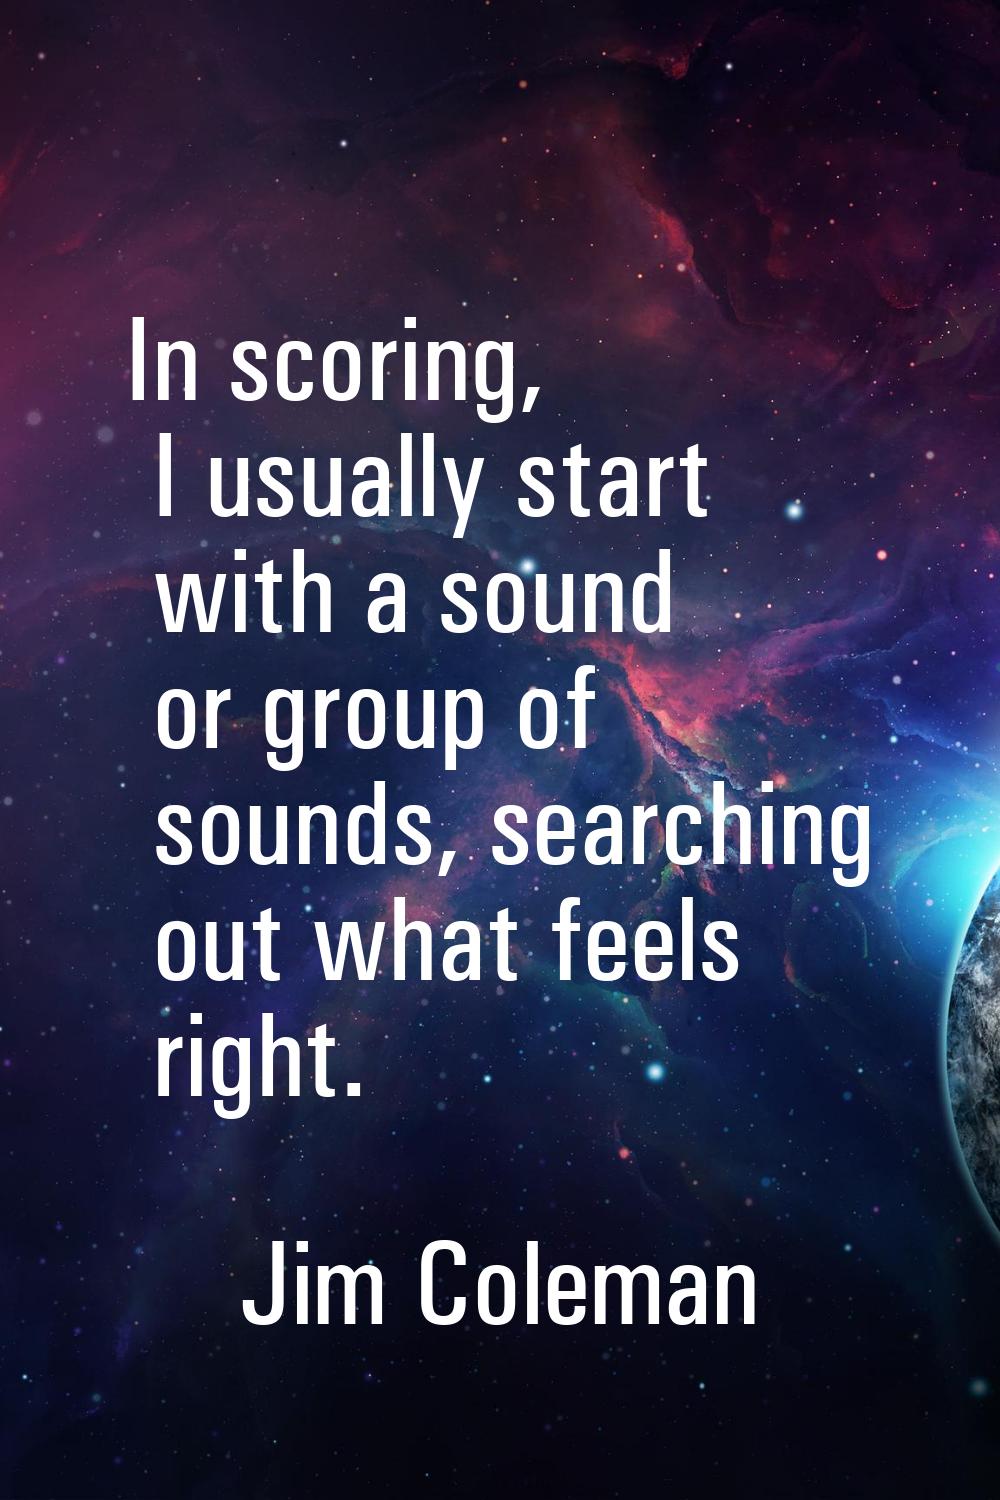 In scoring, I usually start with a sound or group of sounds, searching out what feels right.